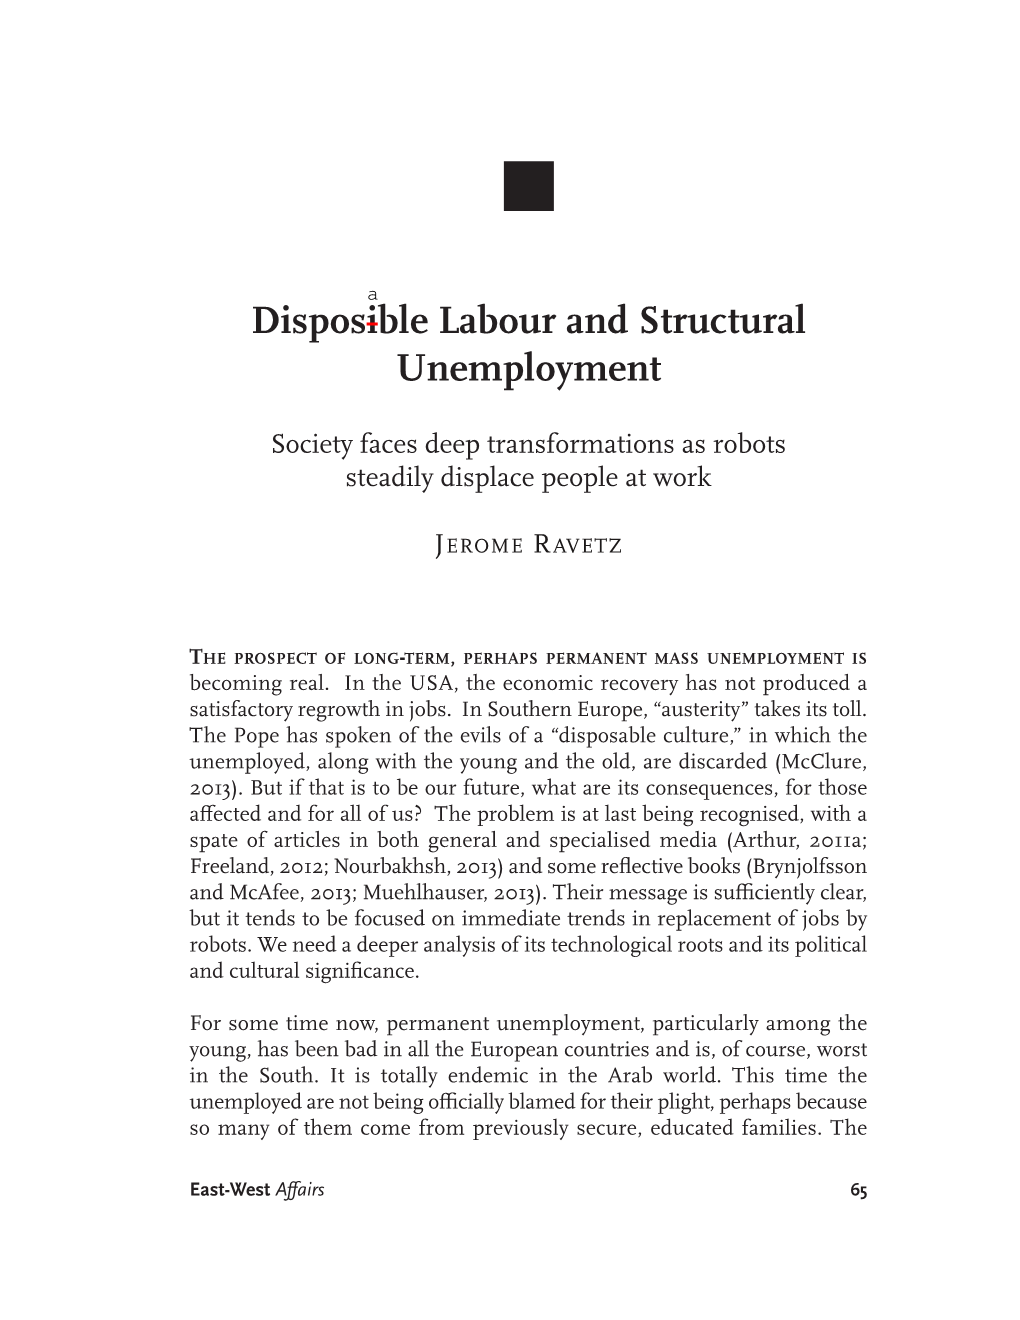 Disposable Labor and Structural Unemployment